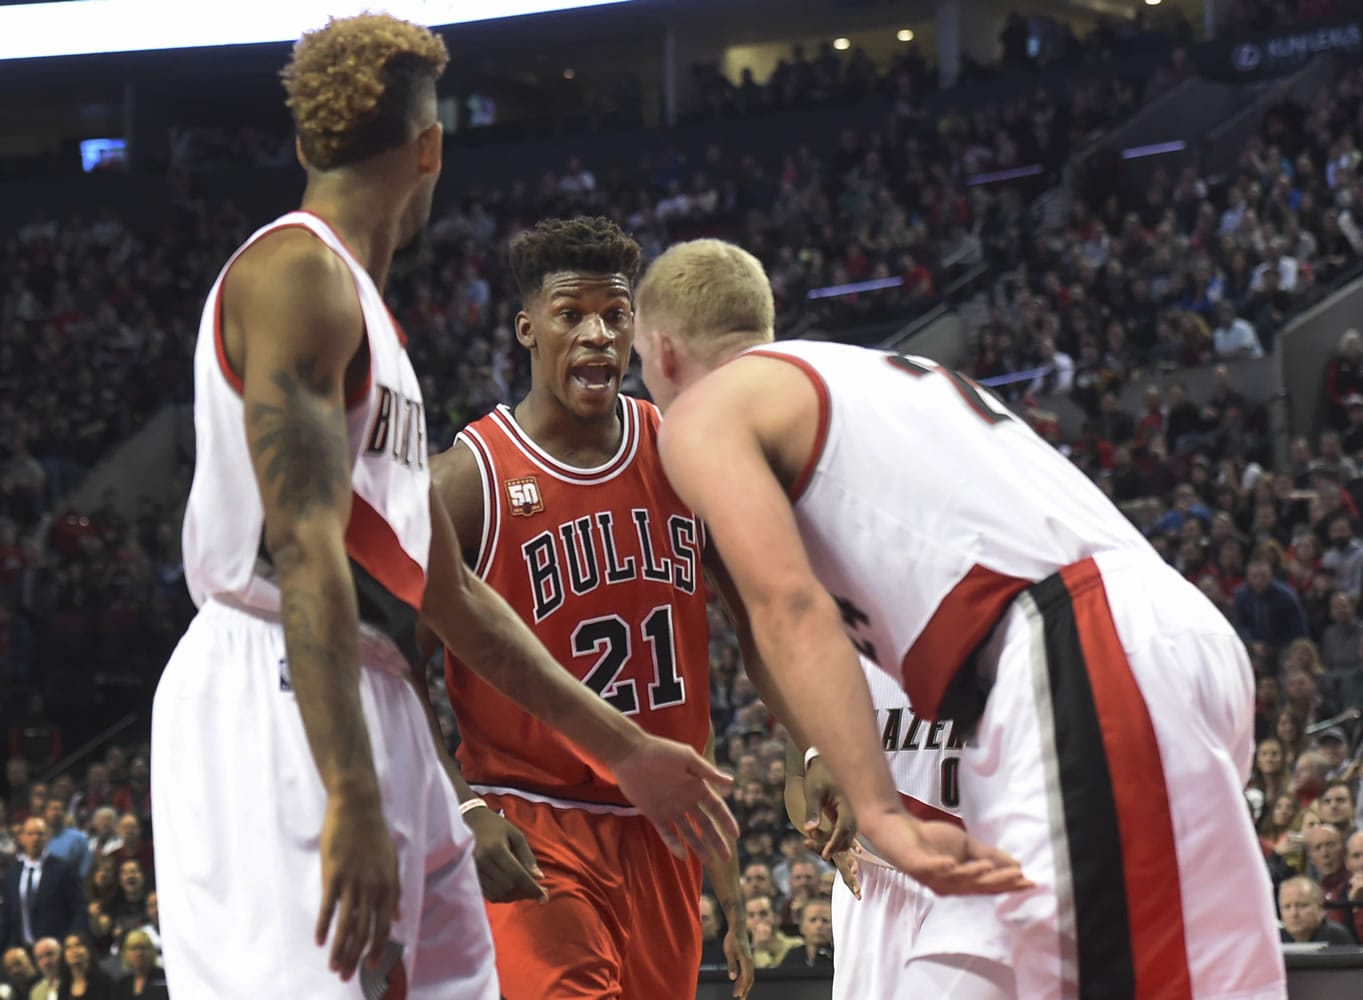 Chicago Bulls guard Jimmy Butler (21) and Portland Trail Blazers center Mason Plumlee (24) exchange words during the fourth quarter of an NBA basketball game in Portland, Ore., Tuesday, Nov 24, 2015. The Bulls won 93-88.